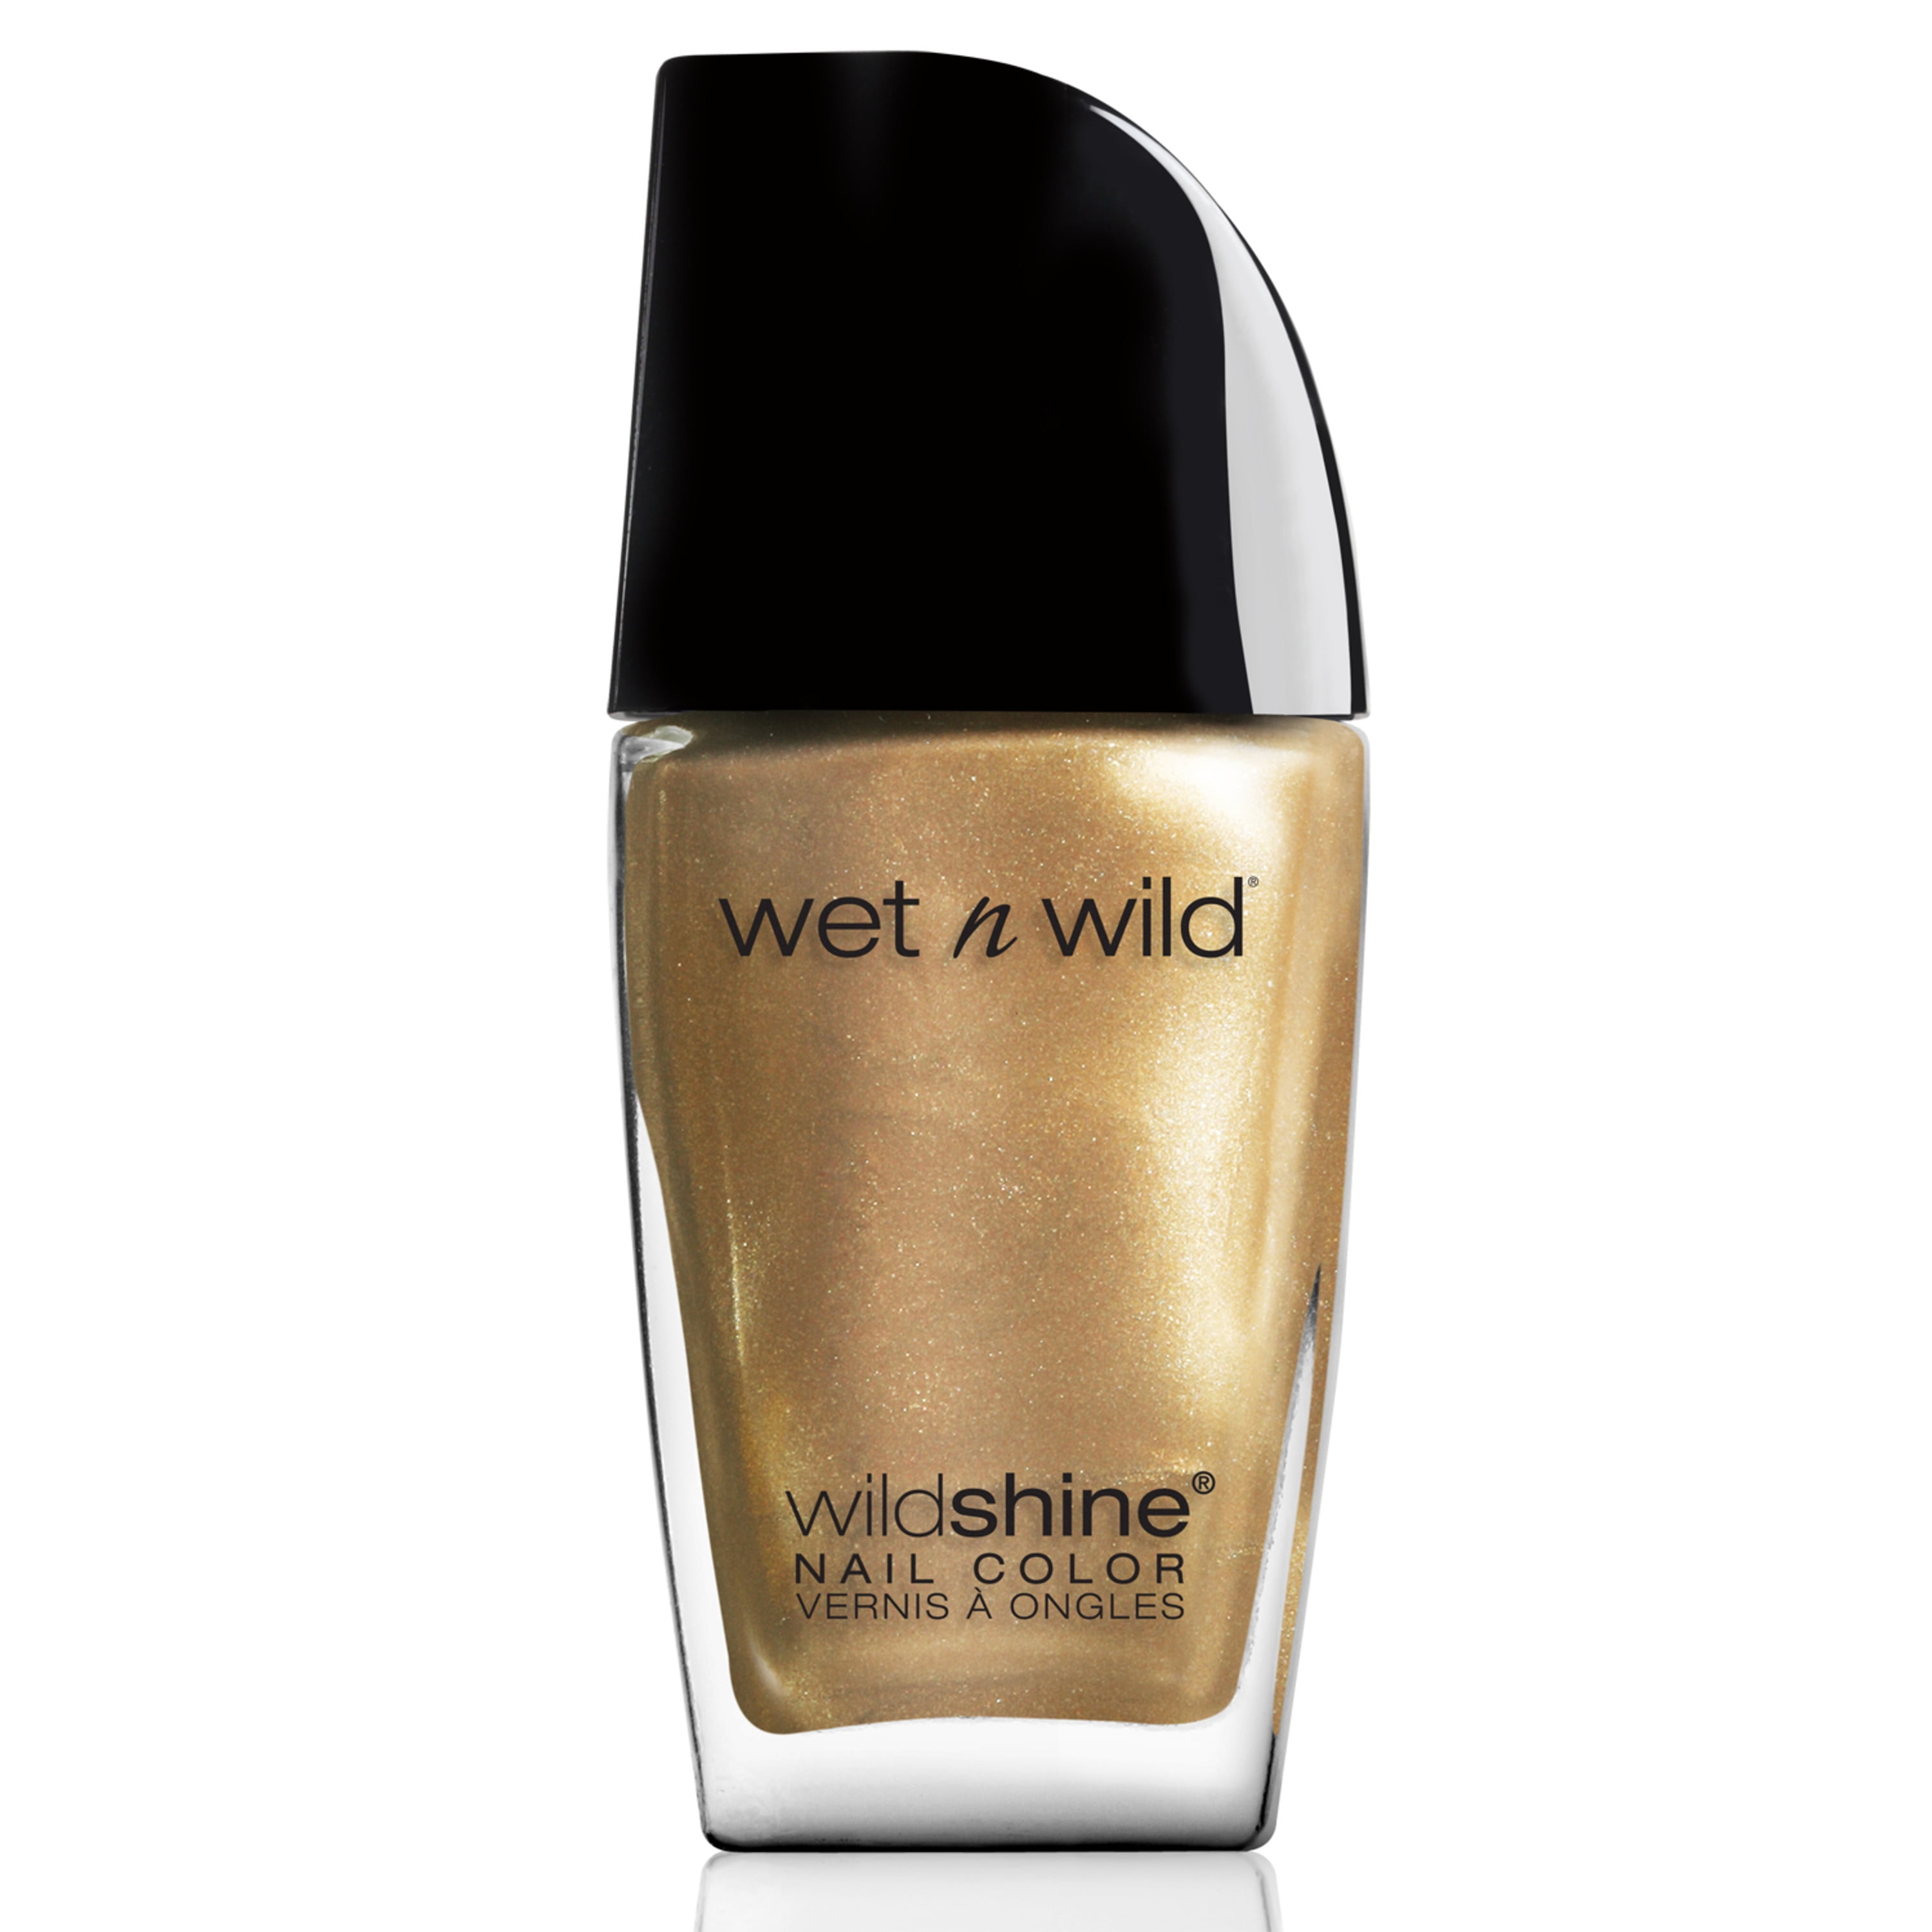 Buy Wet N Wild Wildshine Nail Color #480 Sparked 0.41 Fl Oz Online at Low  Prices in India - Amazon.in